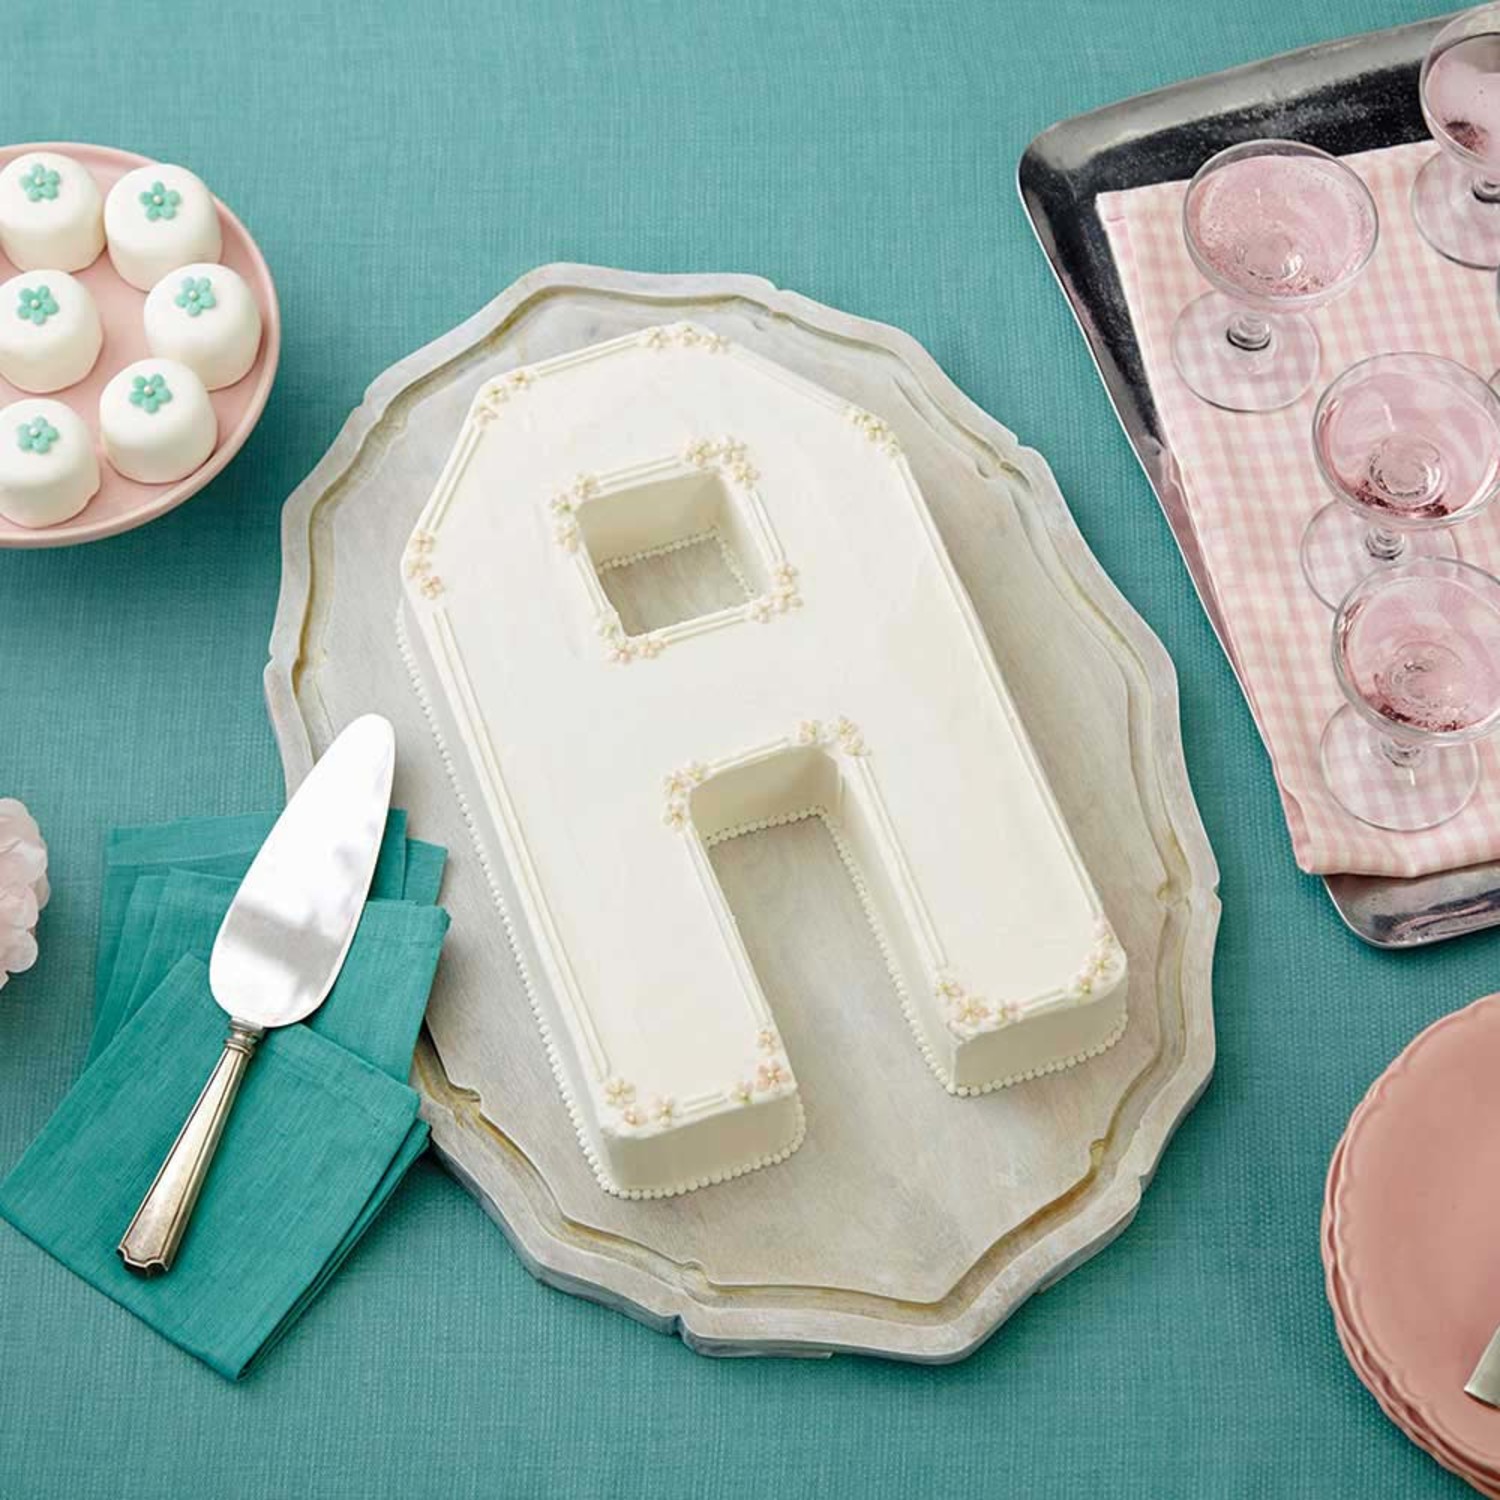 How to Use the Letters and Numbers Cake Pan, Wilton's Baking Blog